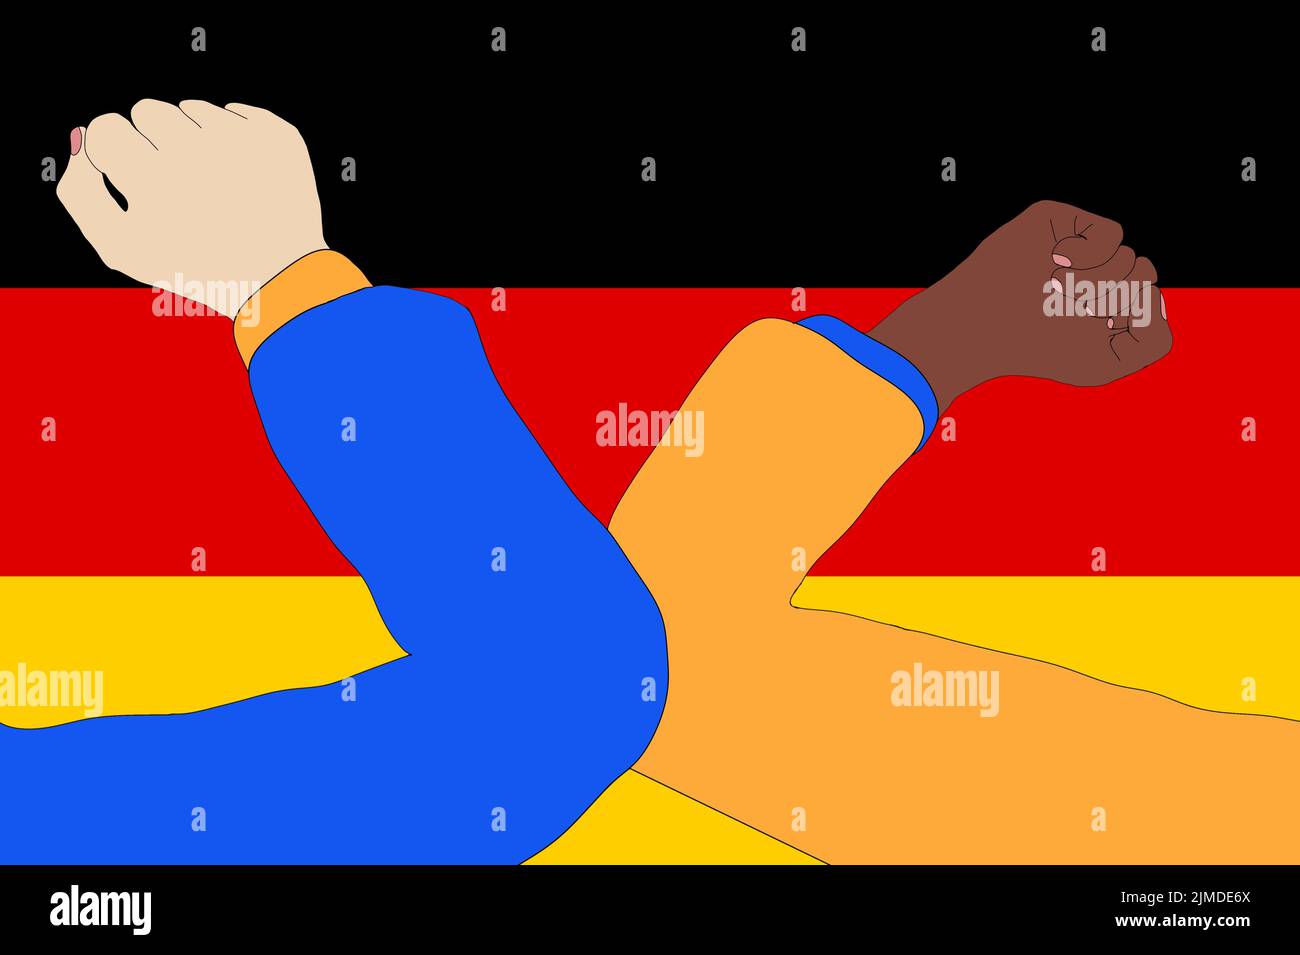 Elbow bump. New, innovative greeting to avoid the spread of the coronavirus in front of a Germany flag. Stock Photo